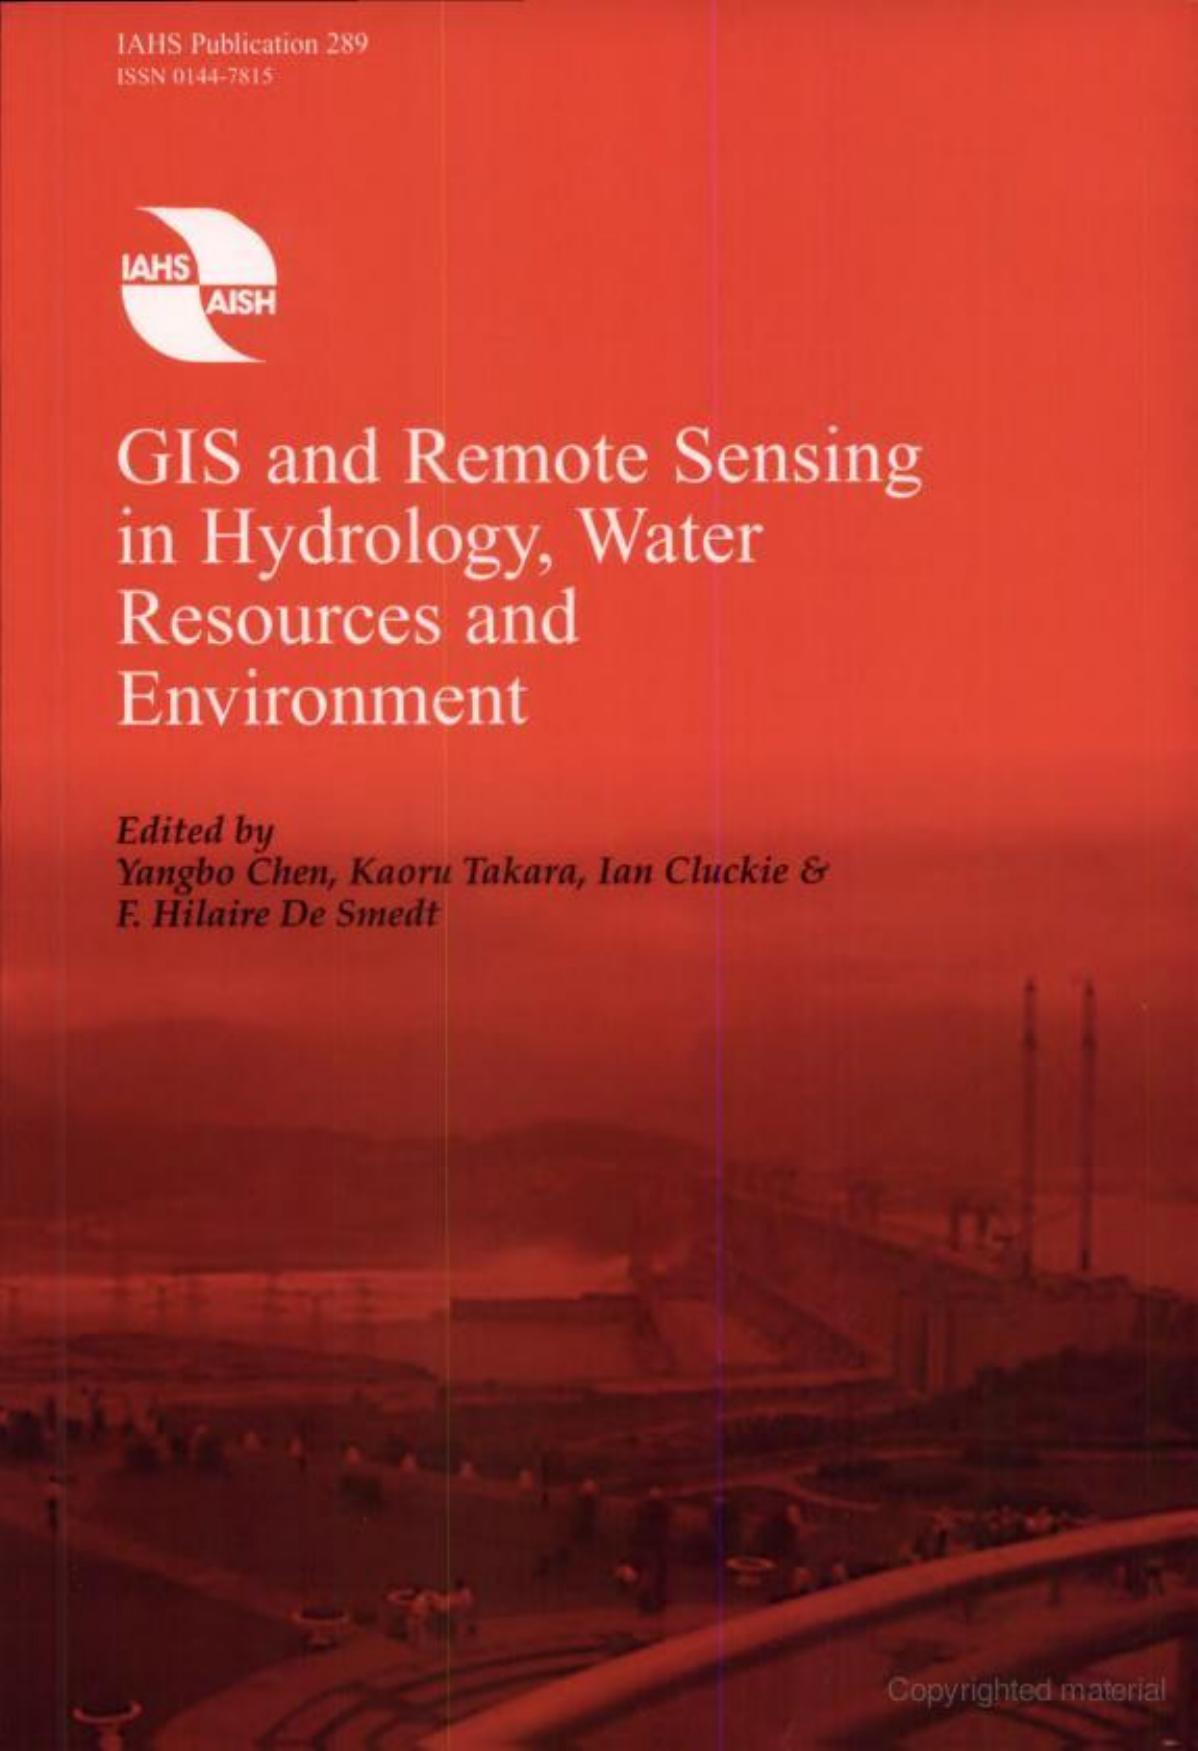 GIS and remote sensing in hydrology, water resources and environment